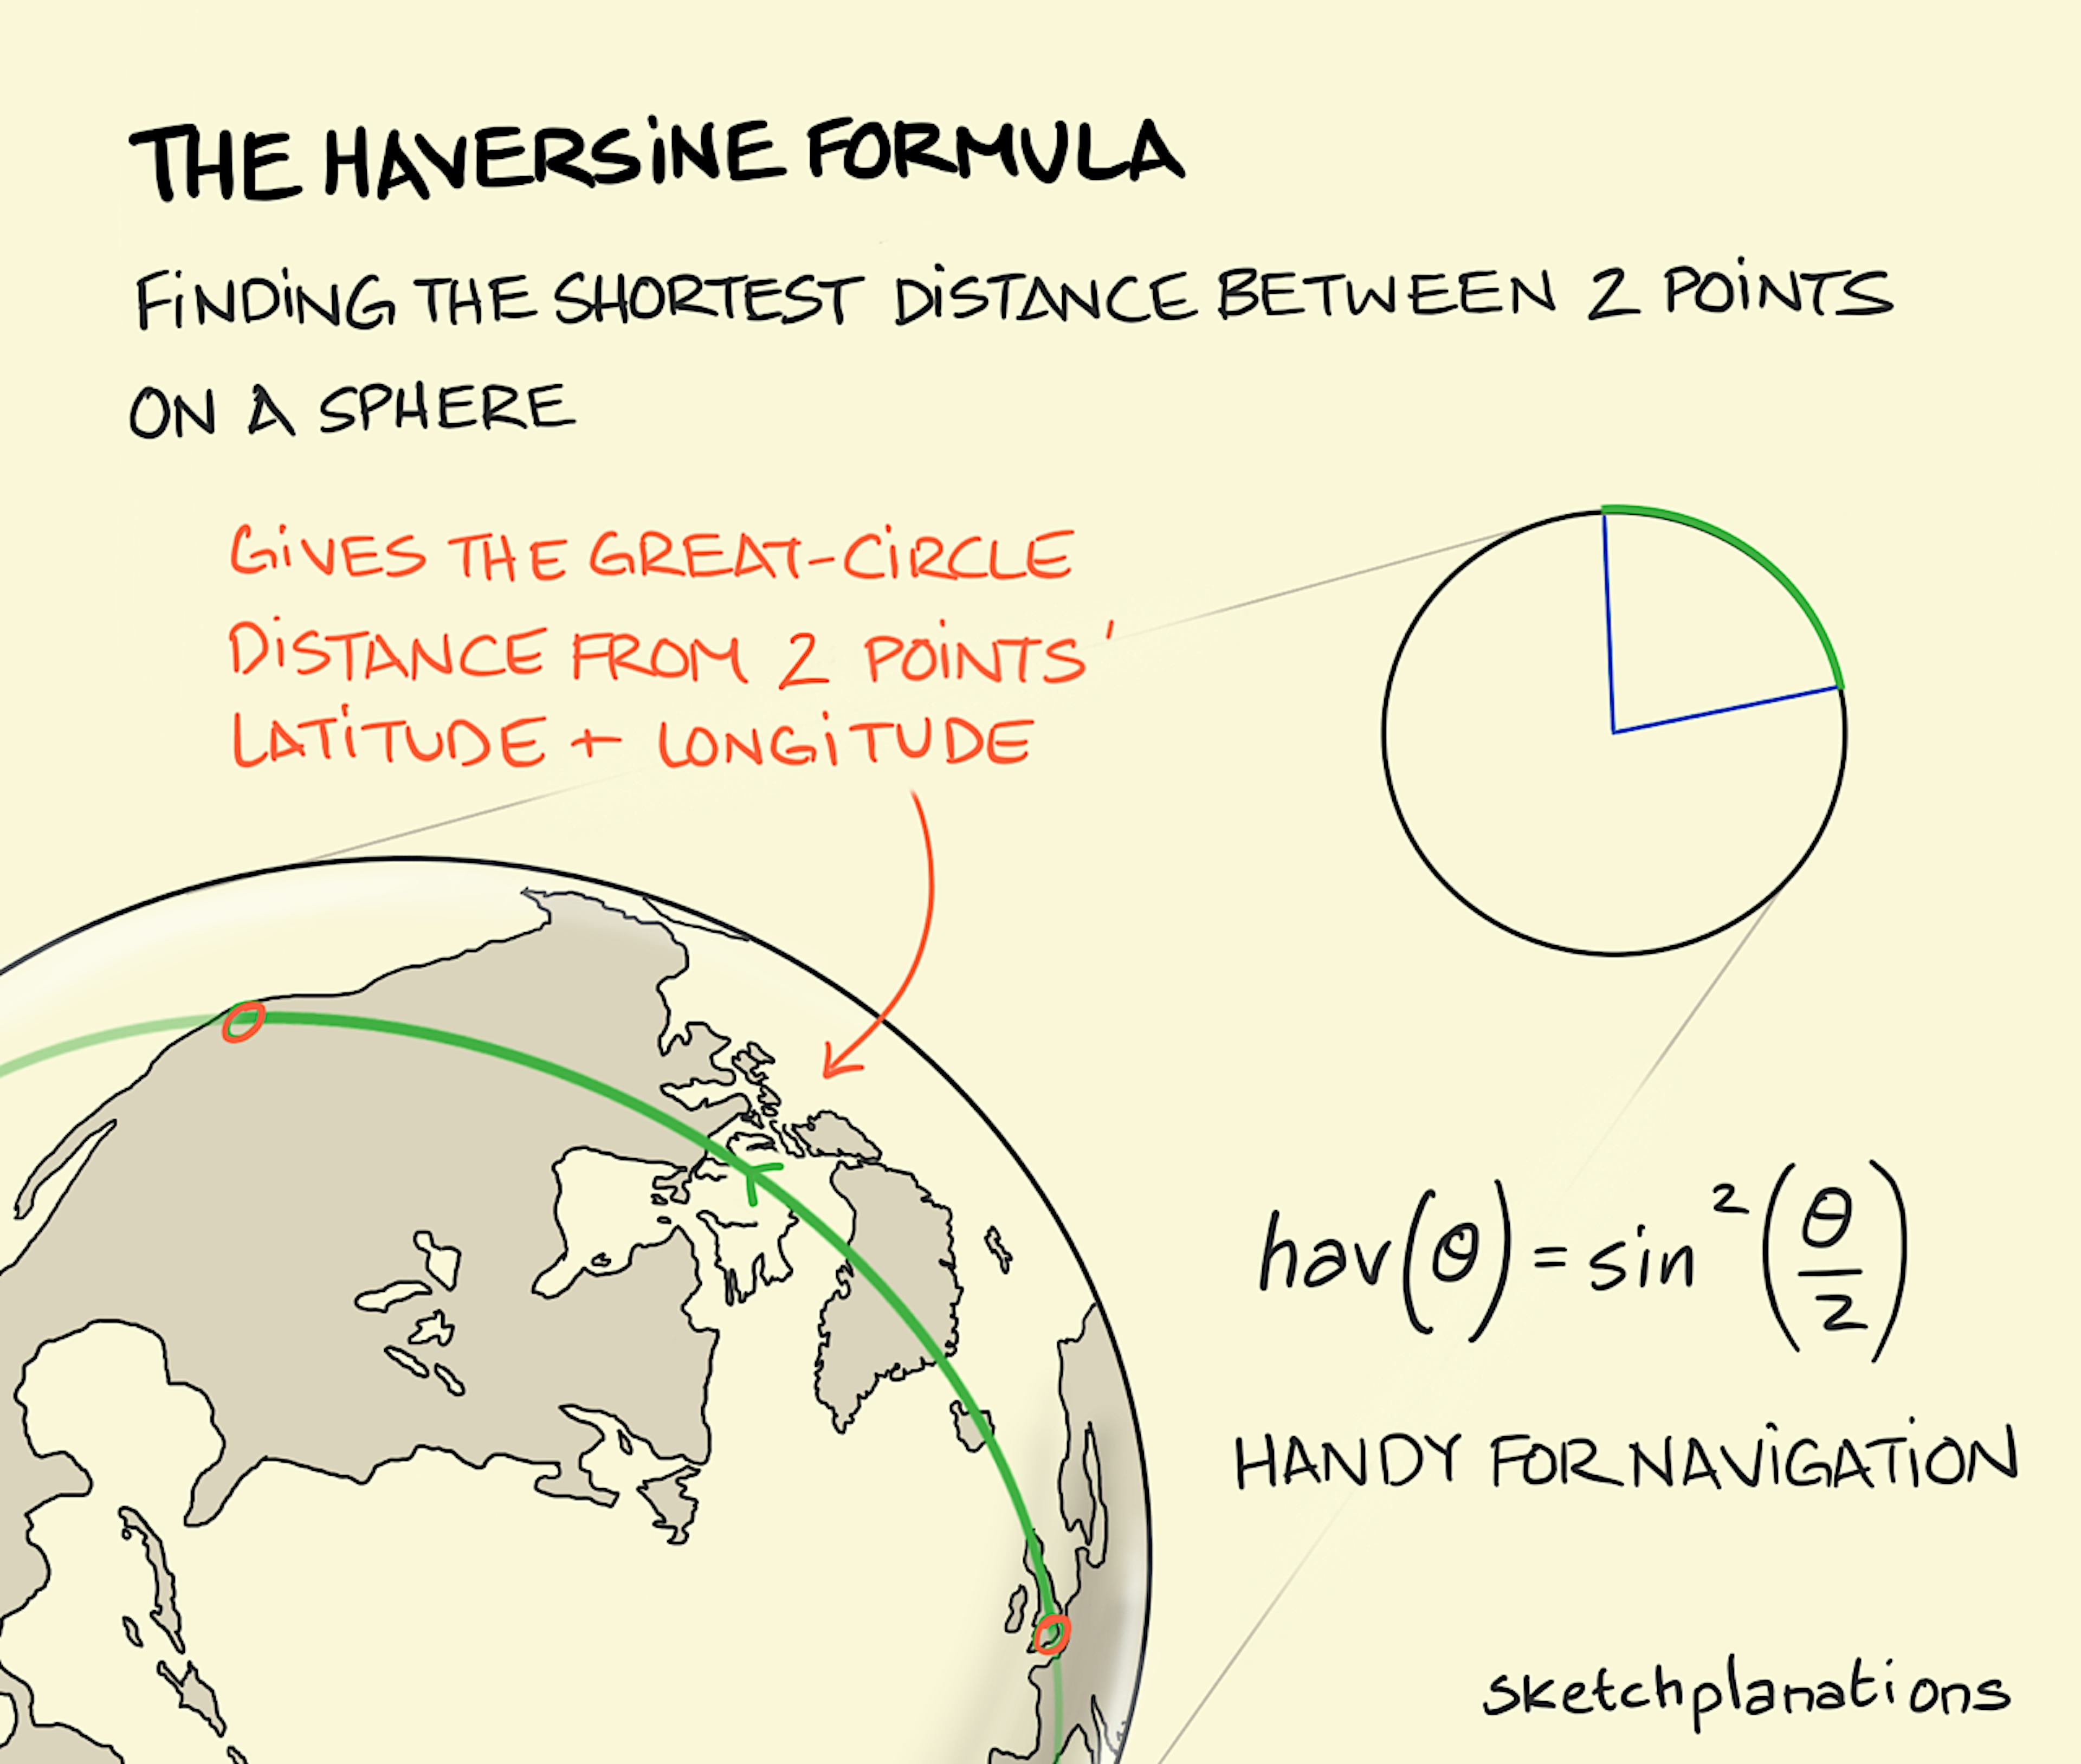 The Haversine Formula illustration: a portion of the earth's globe is shown with a green arc drawn between the cities of London, UK and  Seattle, WA. The mathematical Haversine formula takes into account the curvature of the earth's surface when calculating the true distance between two points on a curved surface. 